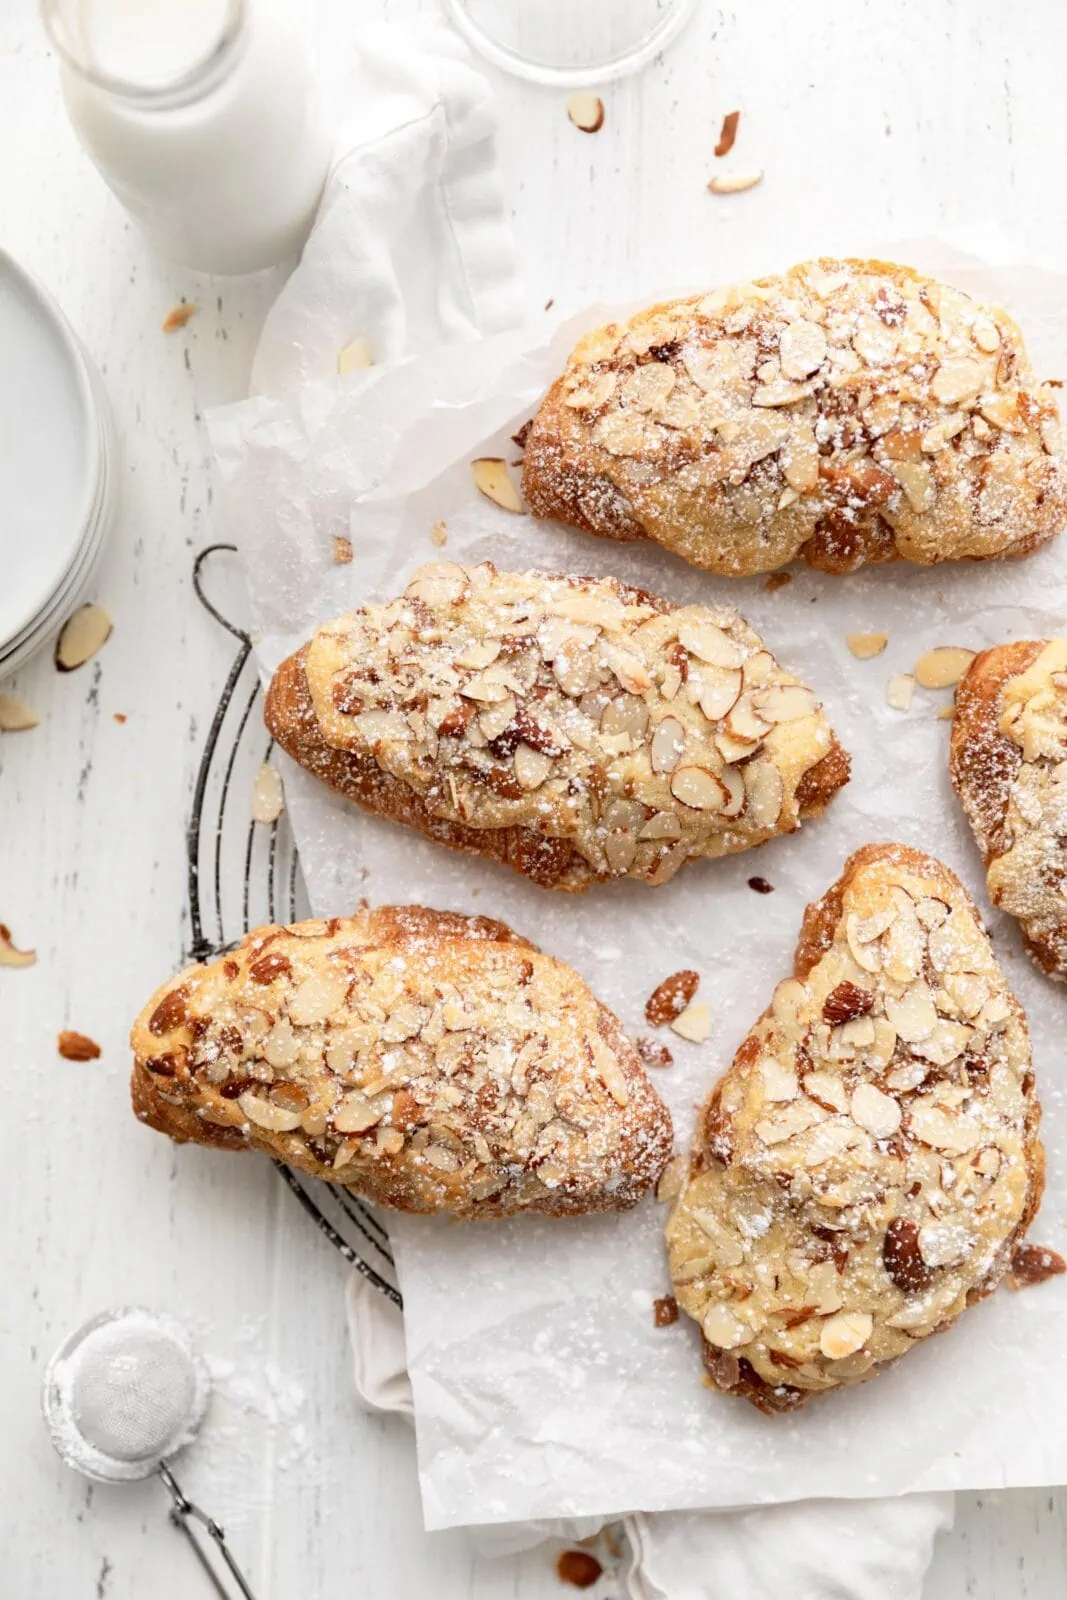 almond croissants with slivered almonds on top